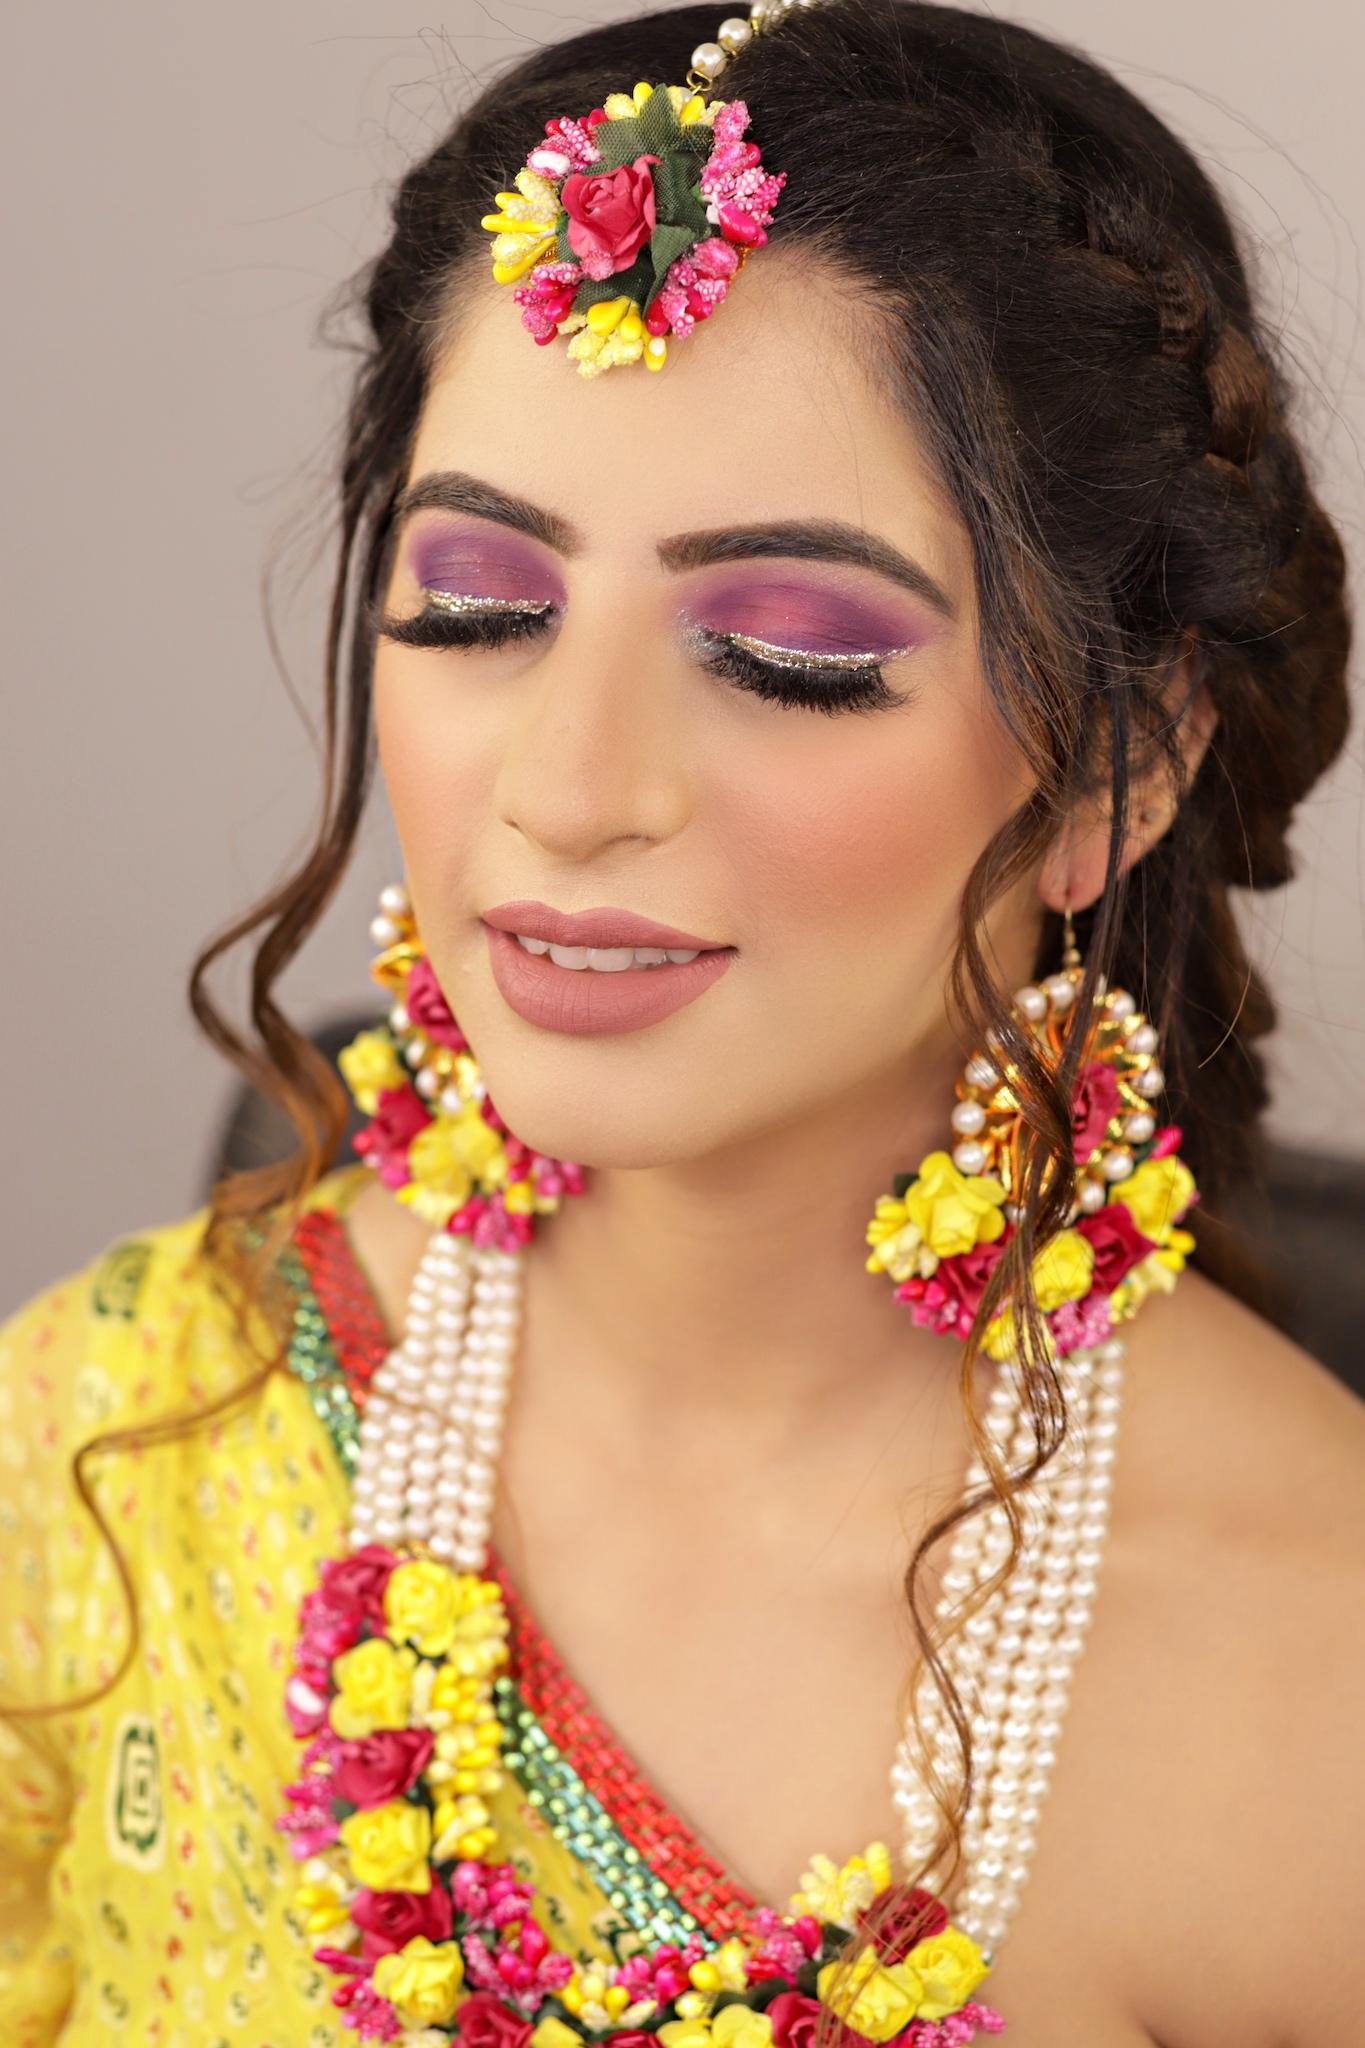 Kiara Advani gives an ode to bohemian chic beauty for her mehendi ceremony  | Vogue India